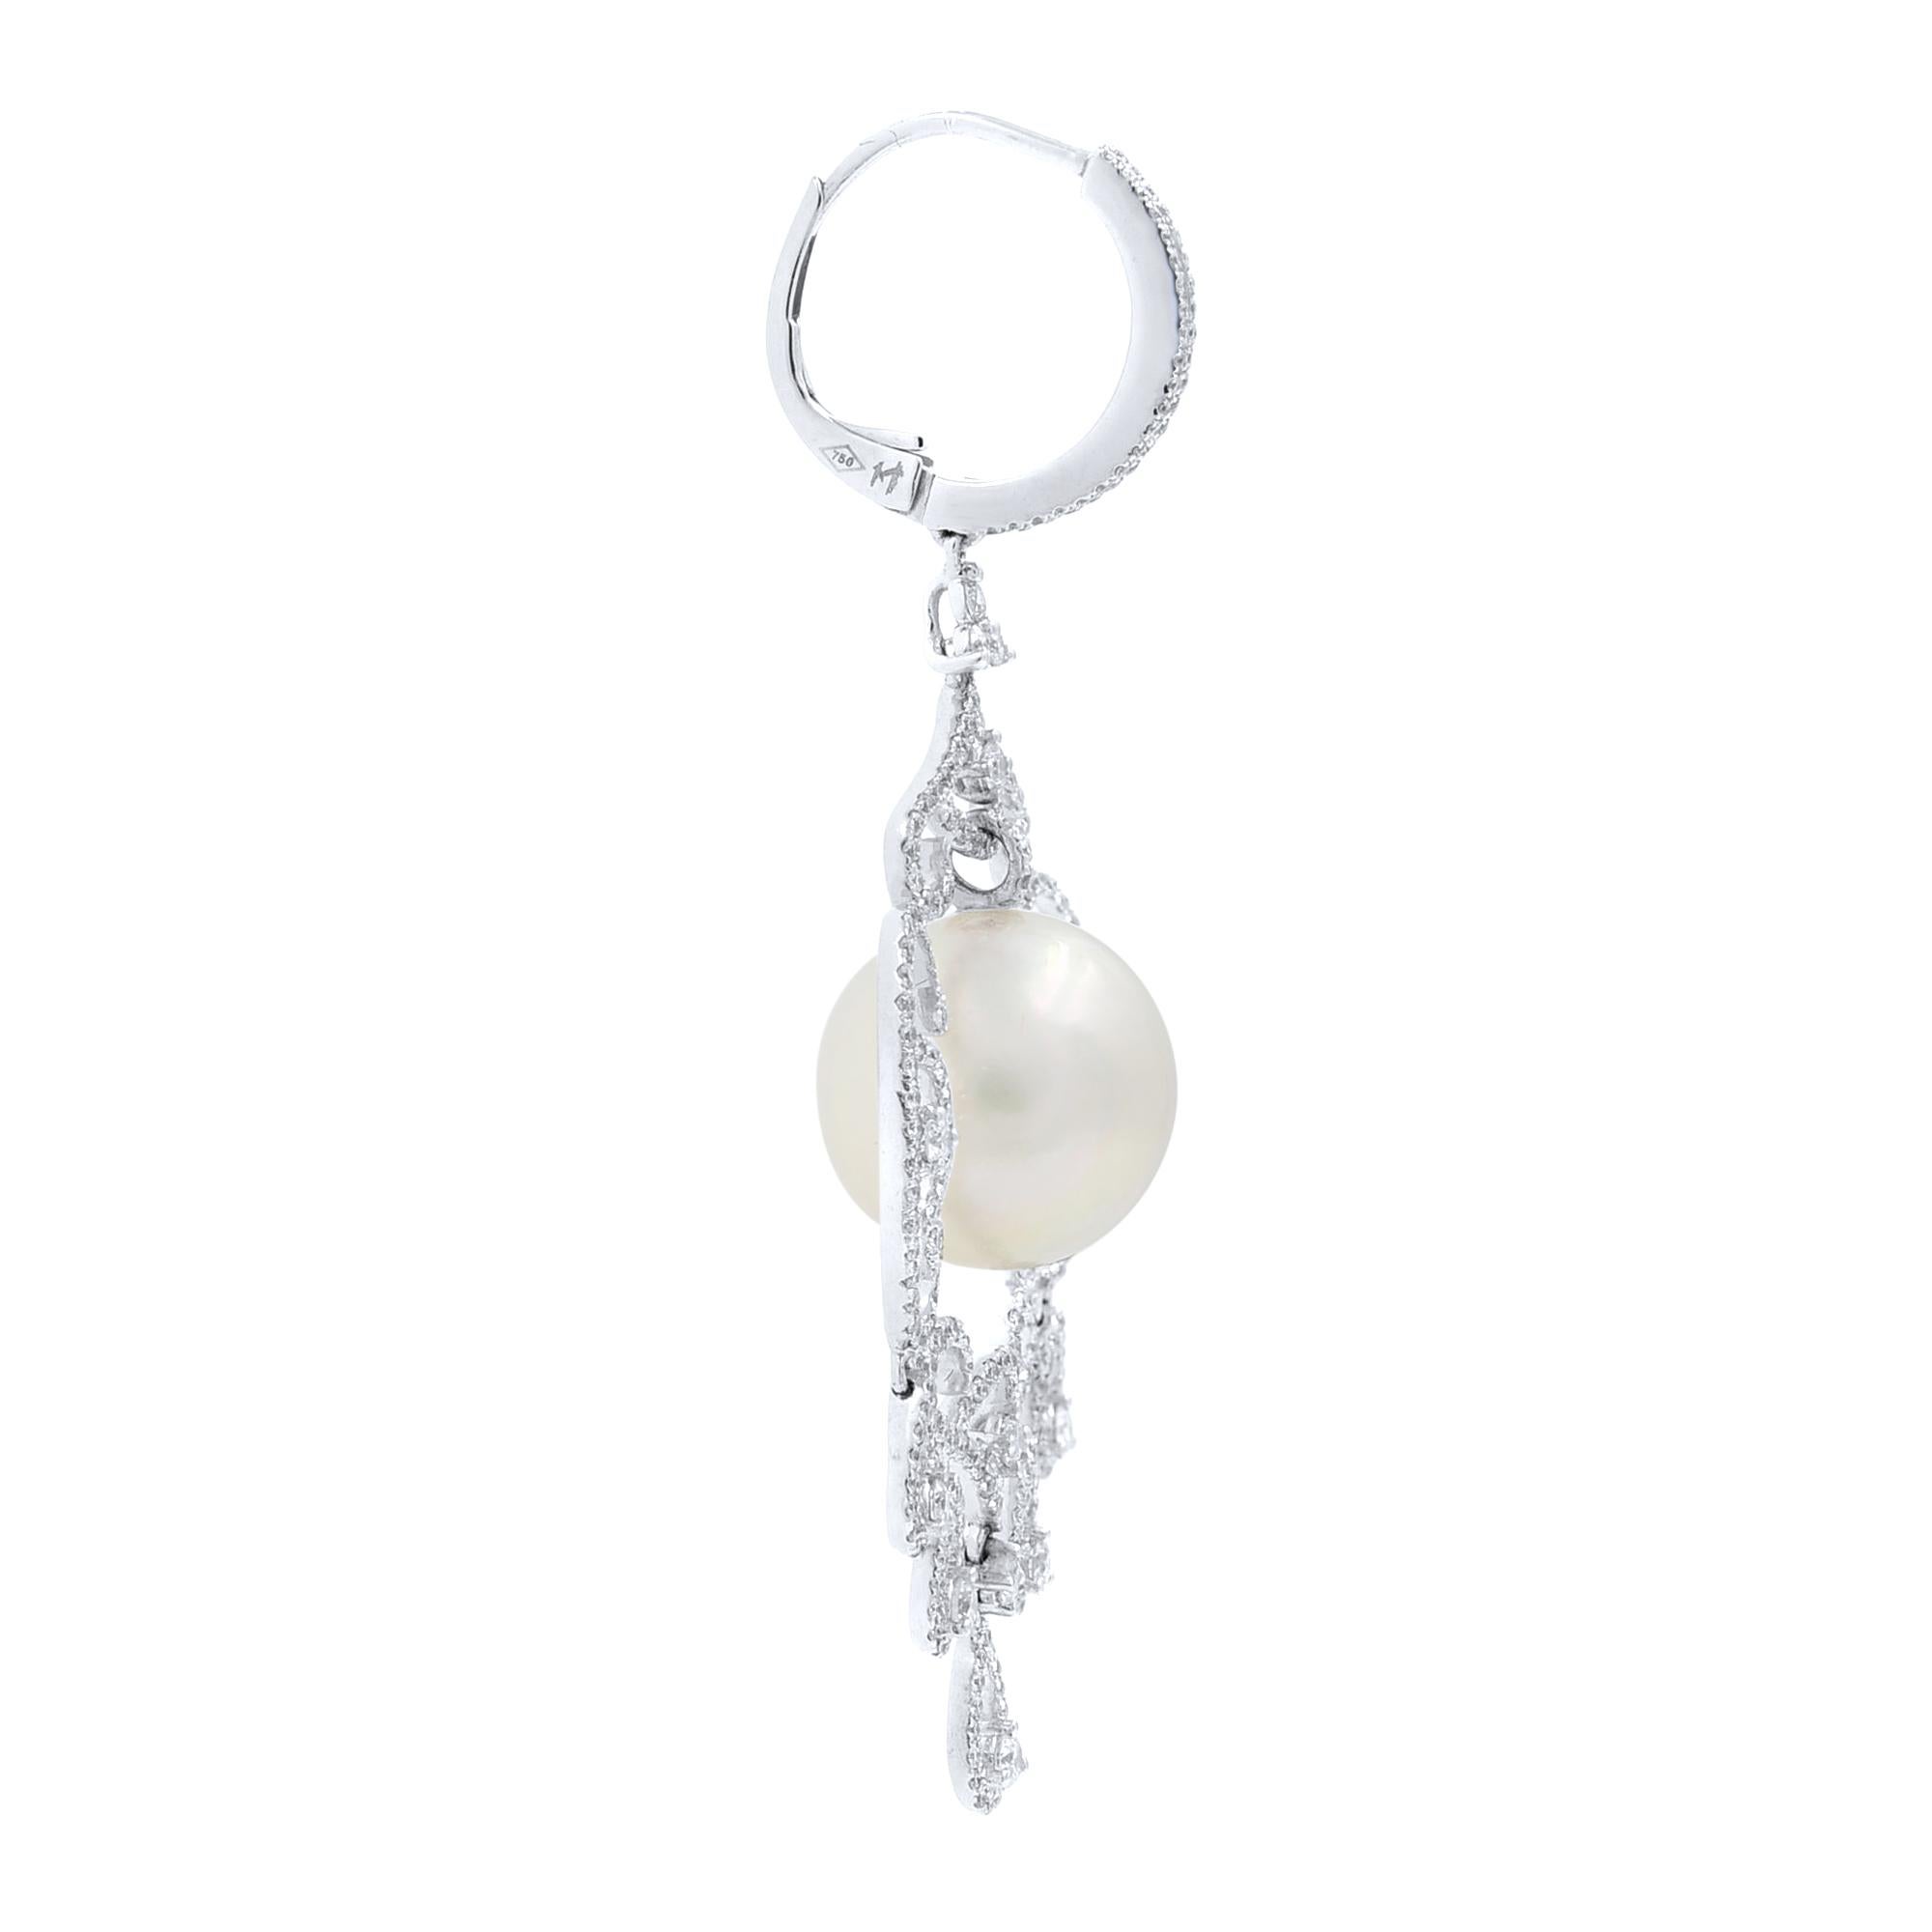 These divine white gold bridal pearl flower earrings dazzle with pave round cut diamonds in a flower motif. A 12mm pearl dangles just in the center a feminine floral motif drop earrings for women, letting you shine everywhere you go. These stunning